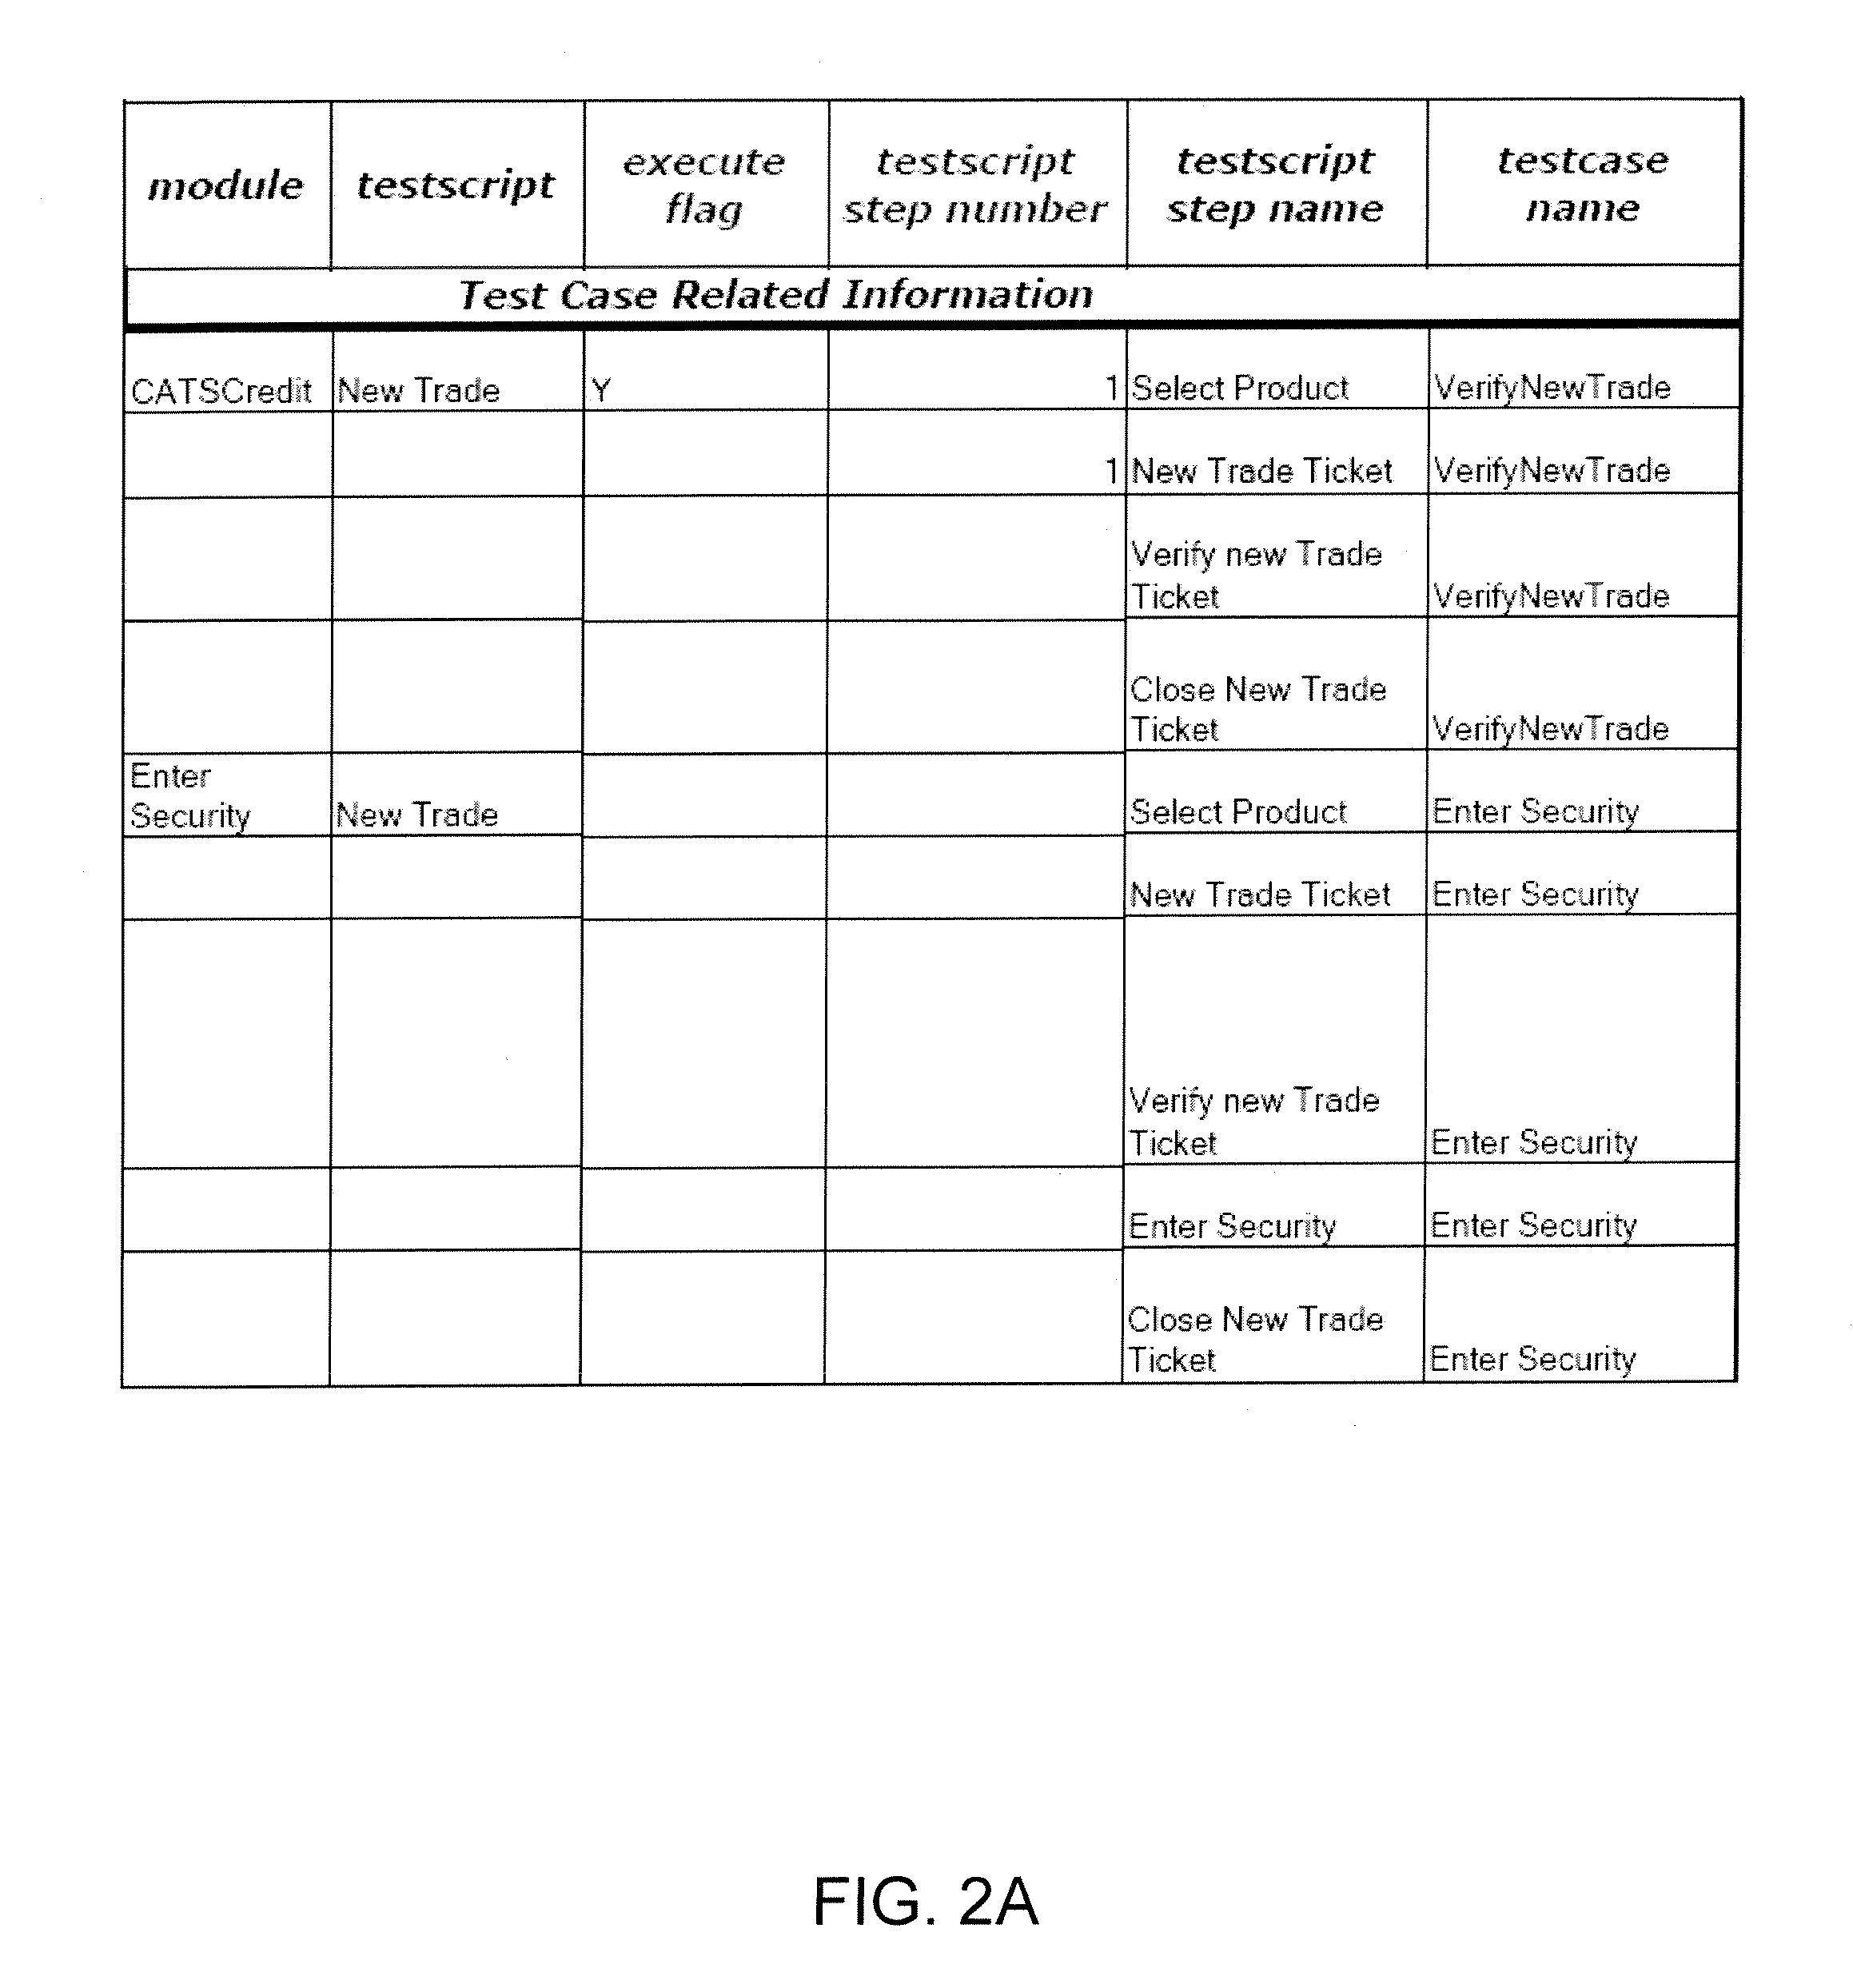 Method and System for Automated Testing of Computer Applications